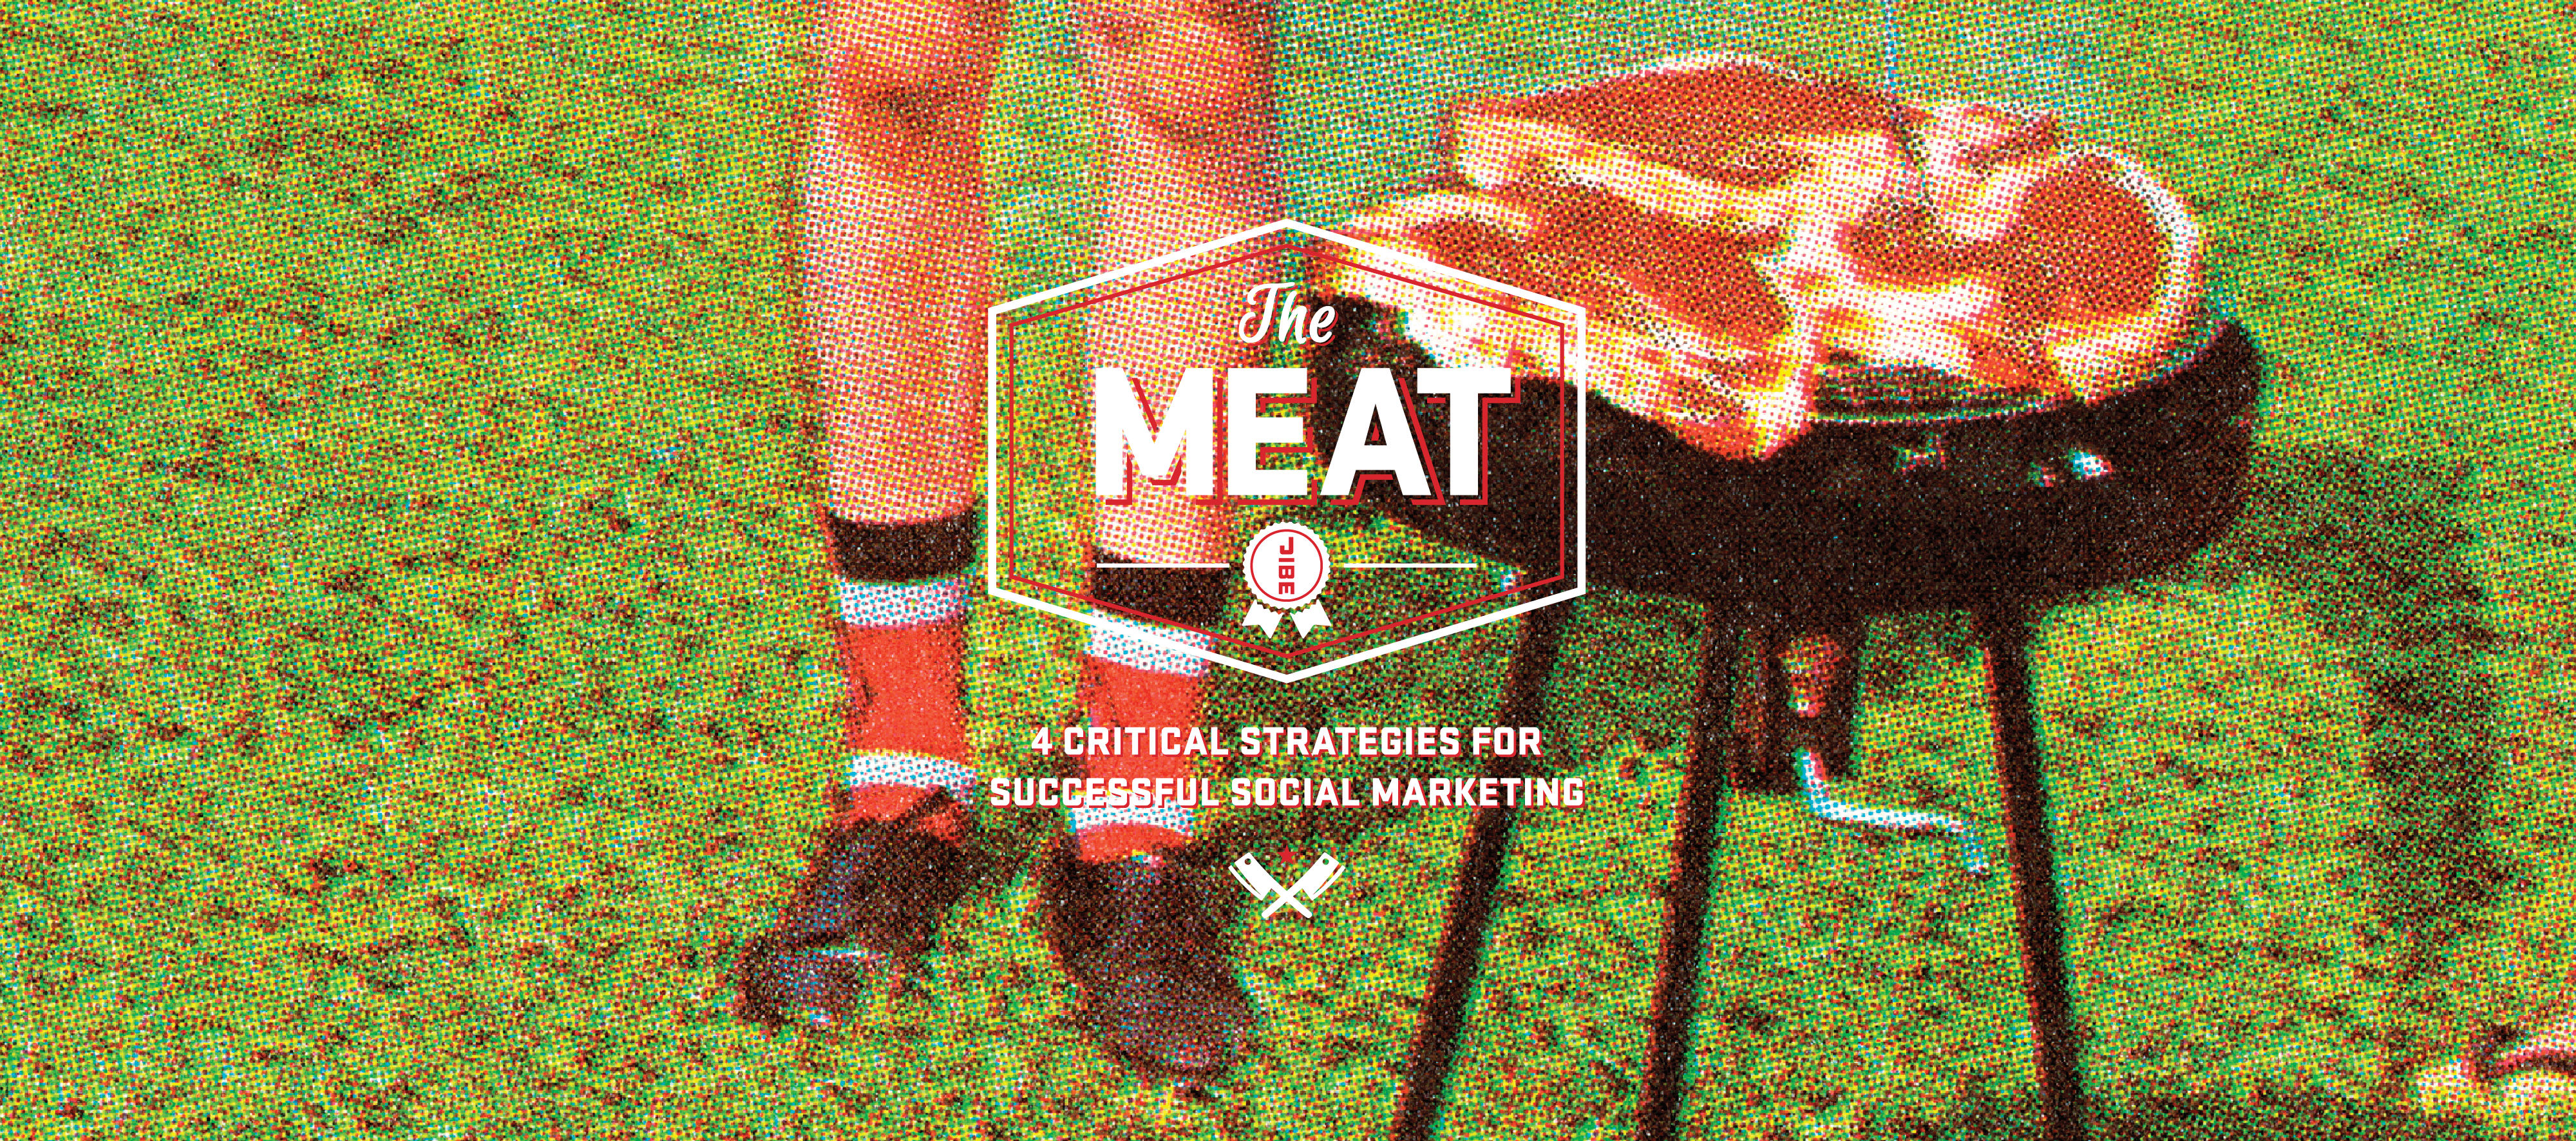 The-Meat-Cover-2